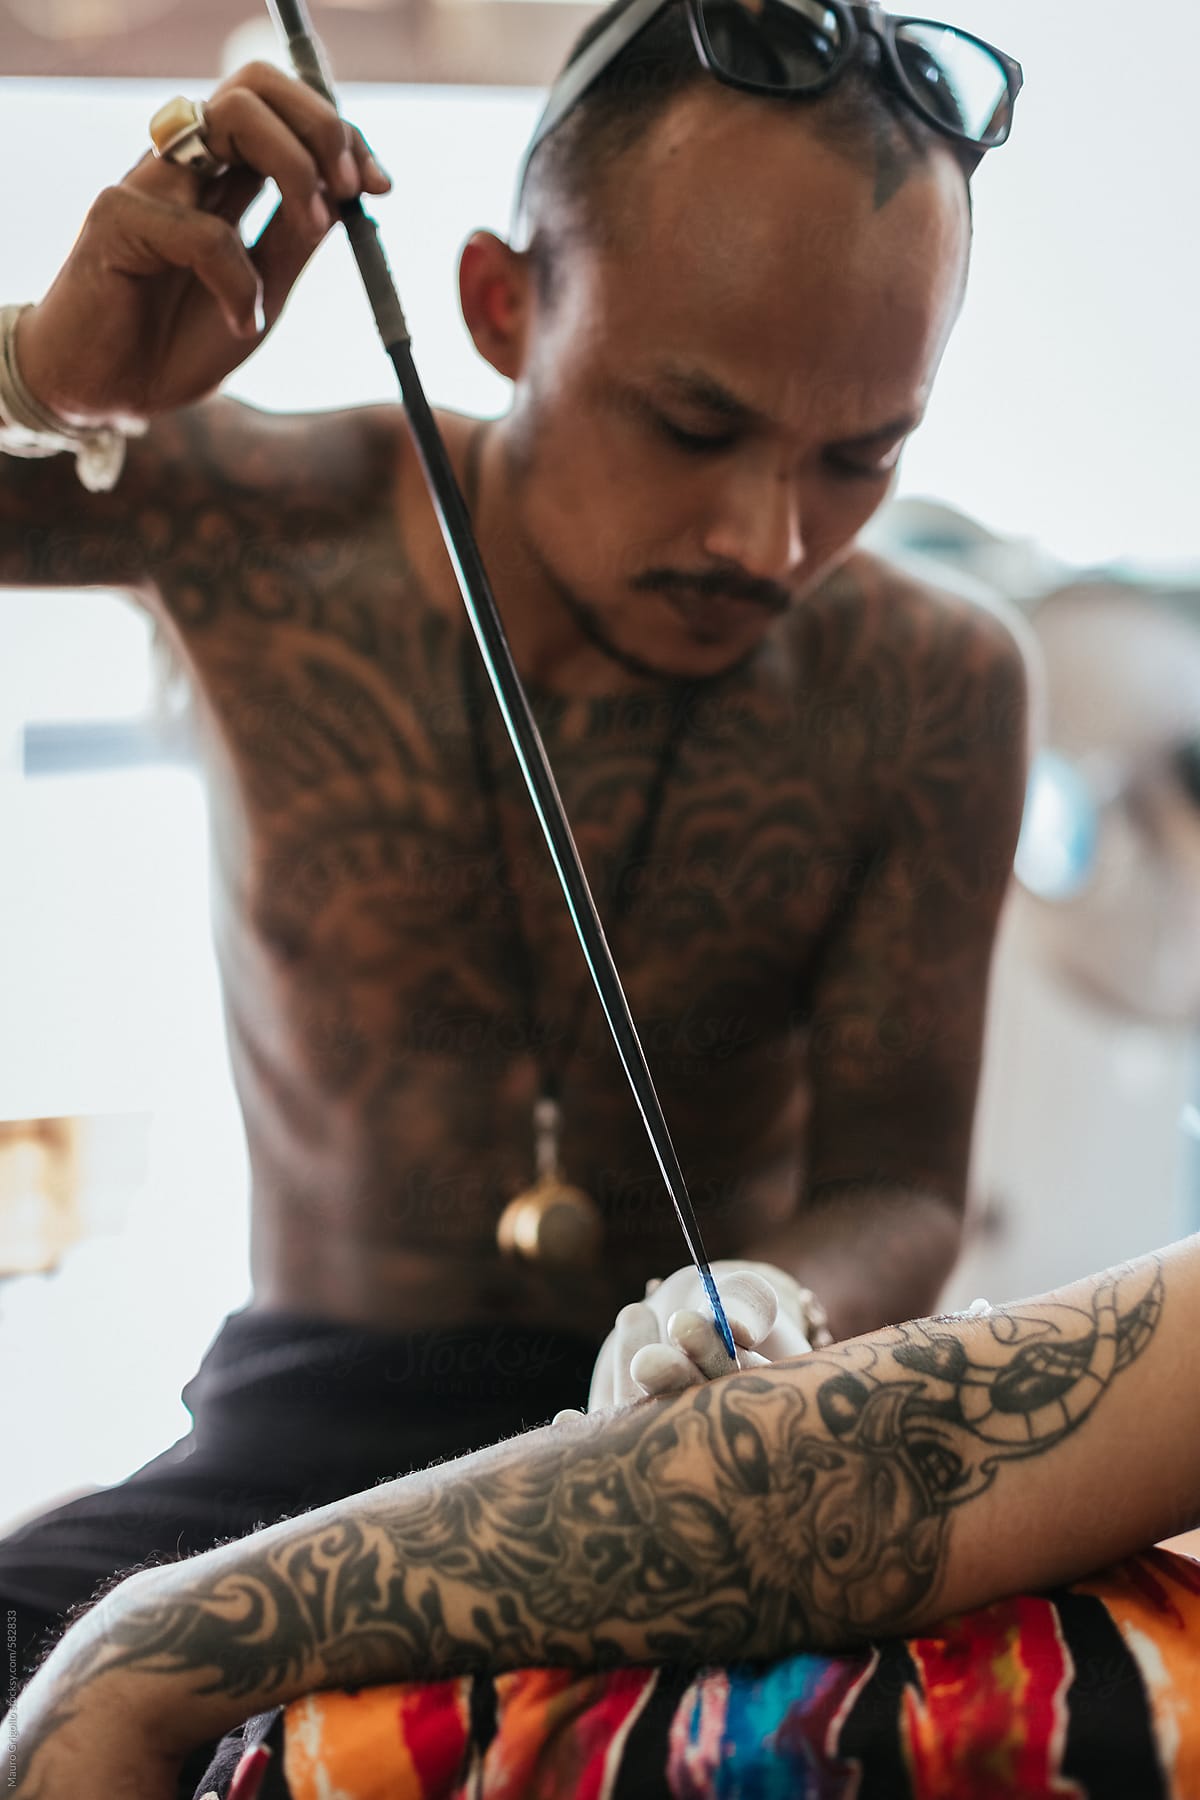 Tattoos in Japan: The eye-watering art thousands cross the world for